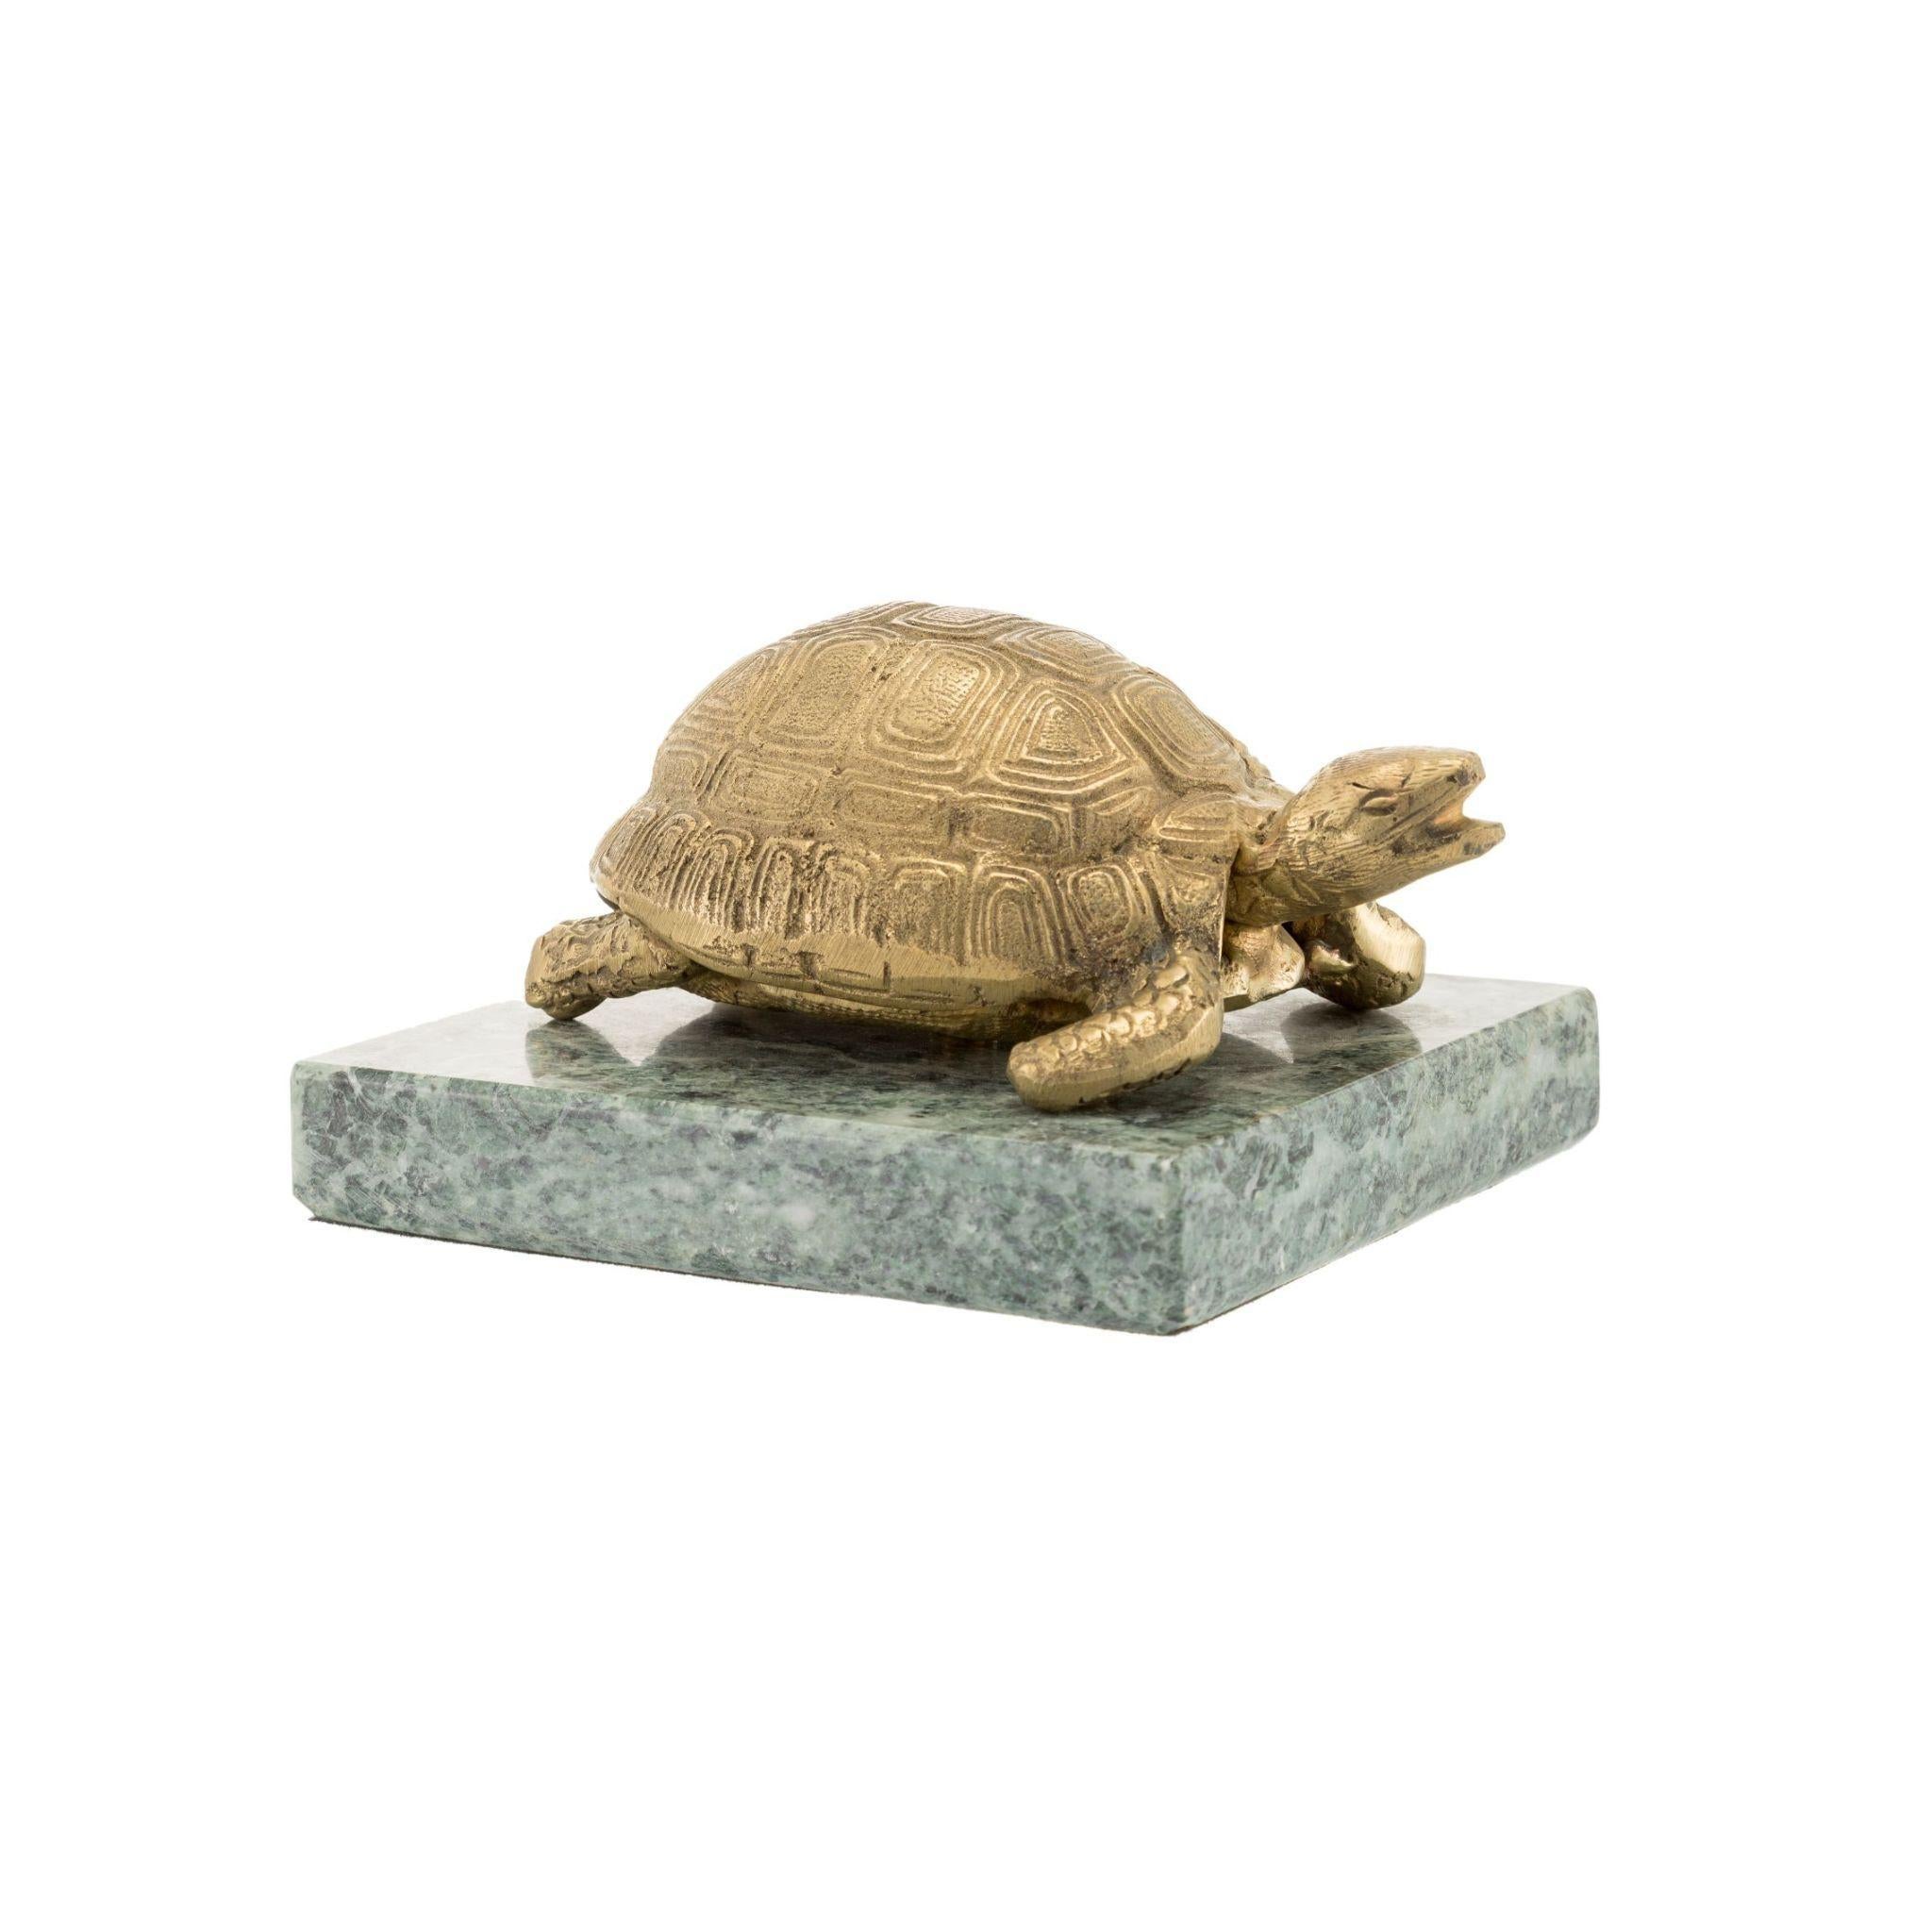 Add a touch of elegance to your home decor with our brass turtle figurine with a green marble base. Made from high-quality brass and featuring a beautiful green marble base, this figurine is the perfect decorative item for your living room or